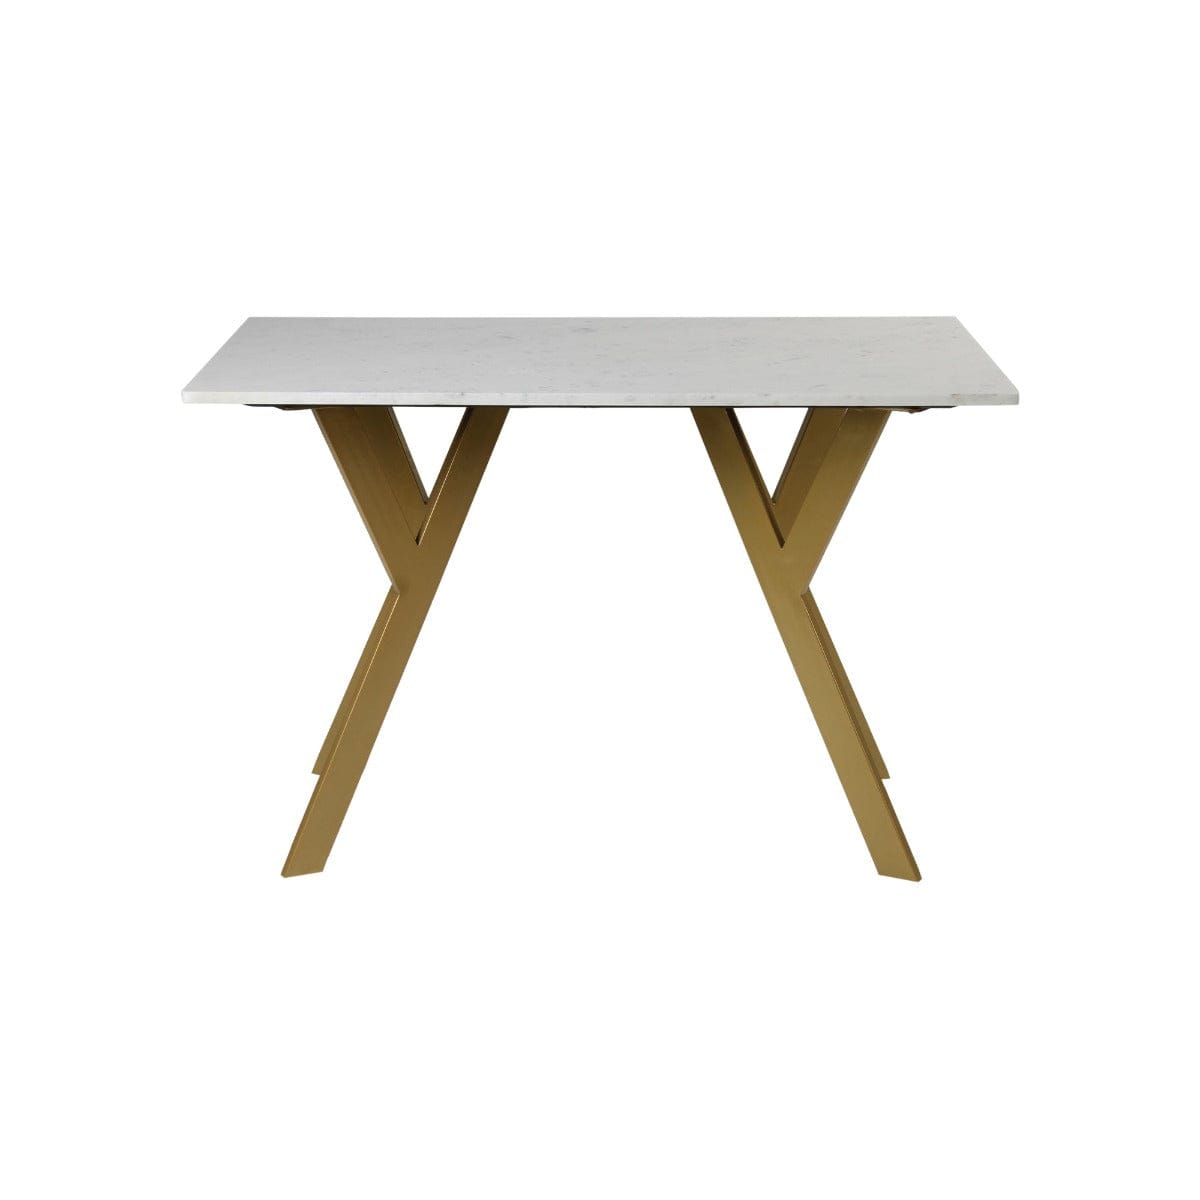 Kir 4 Seater Marble Dining Table In Gold Finish